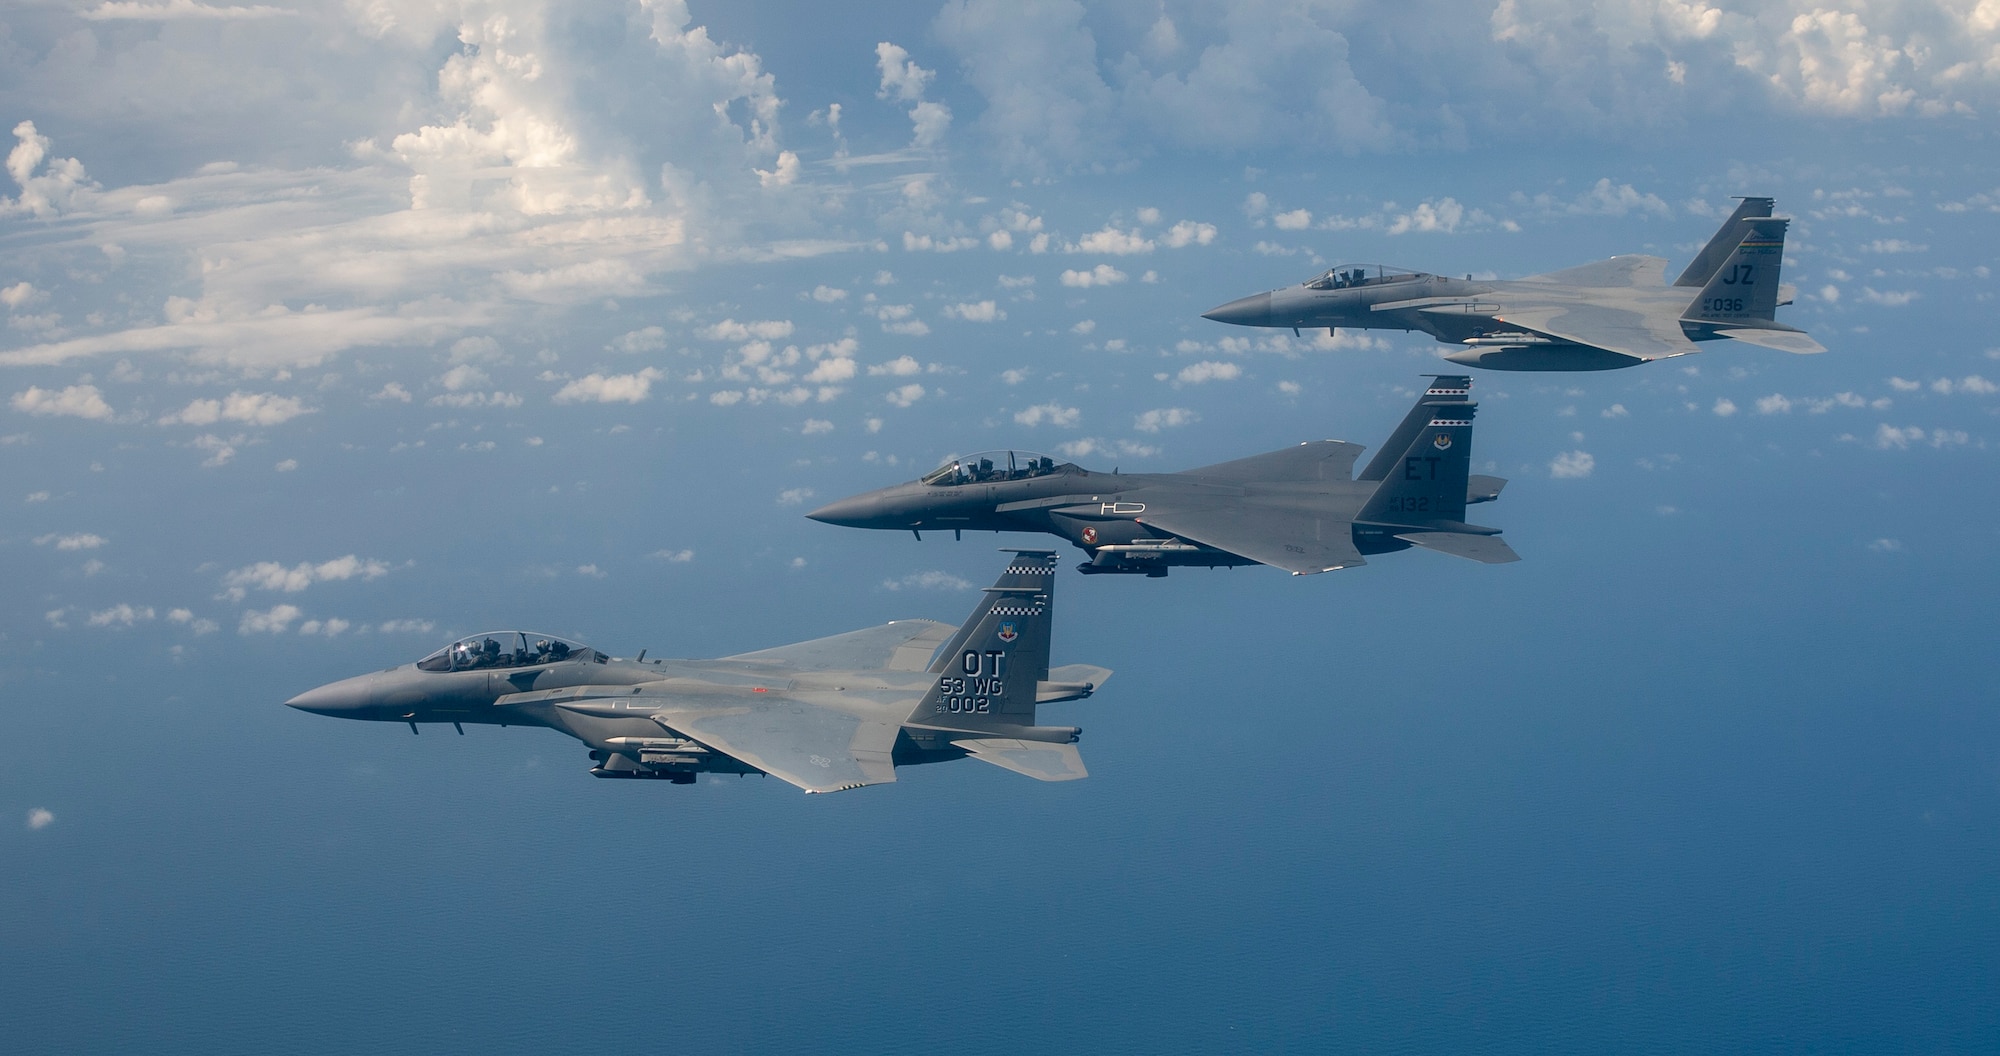 Gen Mark Kelly, Commander of Air Combat Command, leads a two-ship formation of F-15s Eagles from the 53rd Test Wing near Eglin Air Force Base, Fla, Sept. 1, 2021. Gen Kelly, an Eagle pilot for nearly 30 years, flew the Air Force’s newest fighter, the F-15EX Eagle II. (U.S. Air Force photo by Tech. Sgt. John Raven)